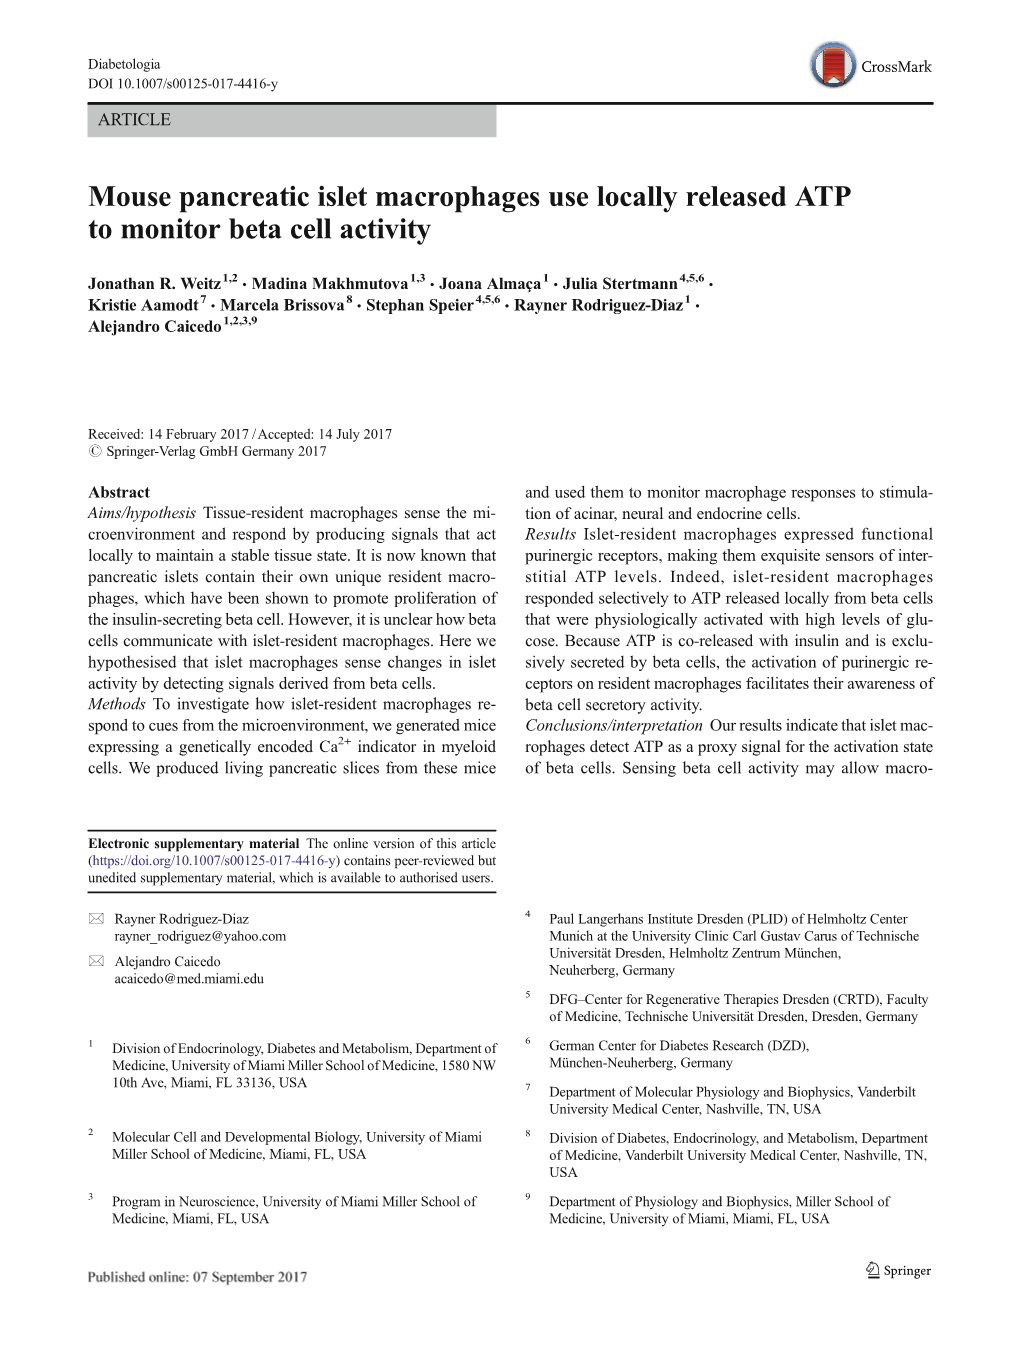 Mouse Pancreatic Islet Macrophages Use Locally Released ATP to Monitor Beta Cell Activity